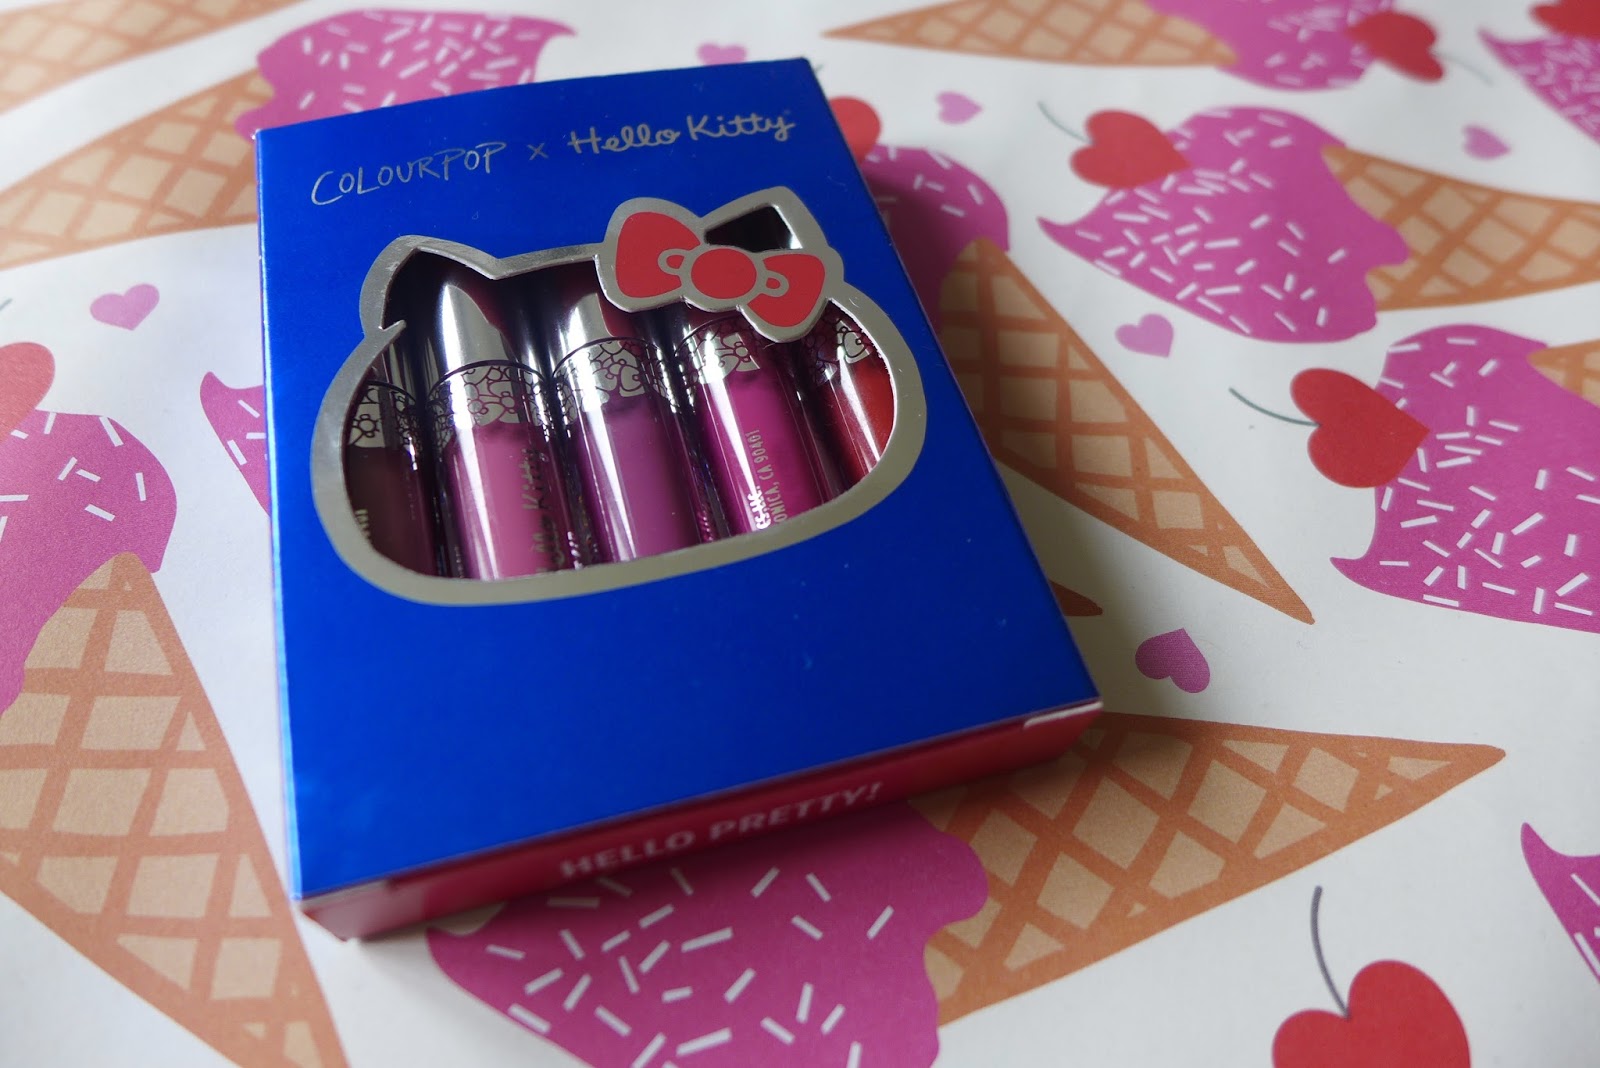 Hello Kitty Gets Pretty with Colourpop